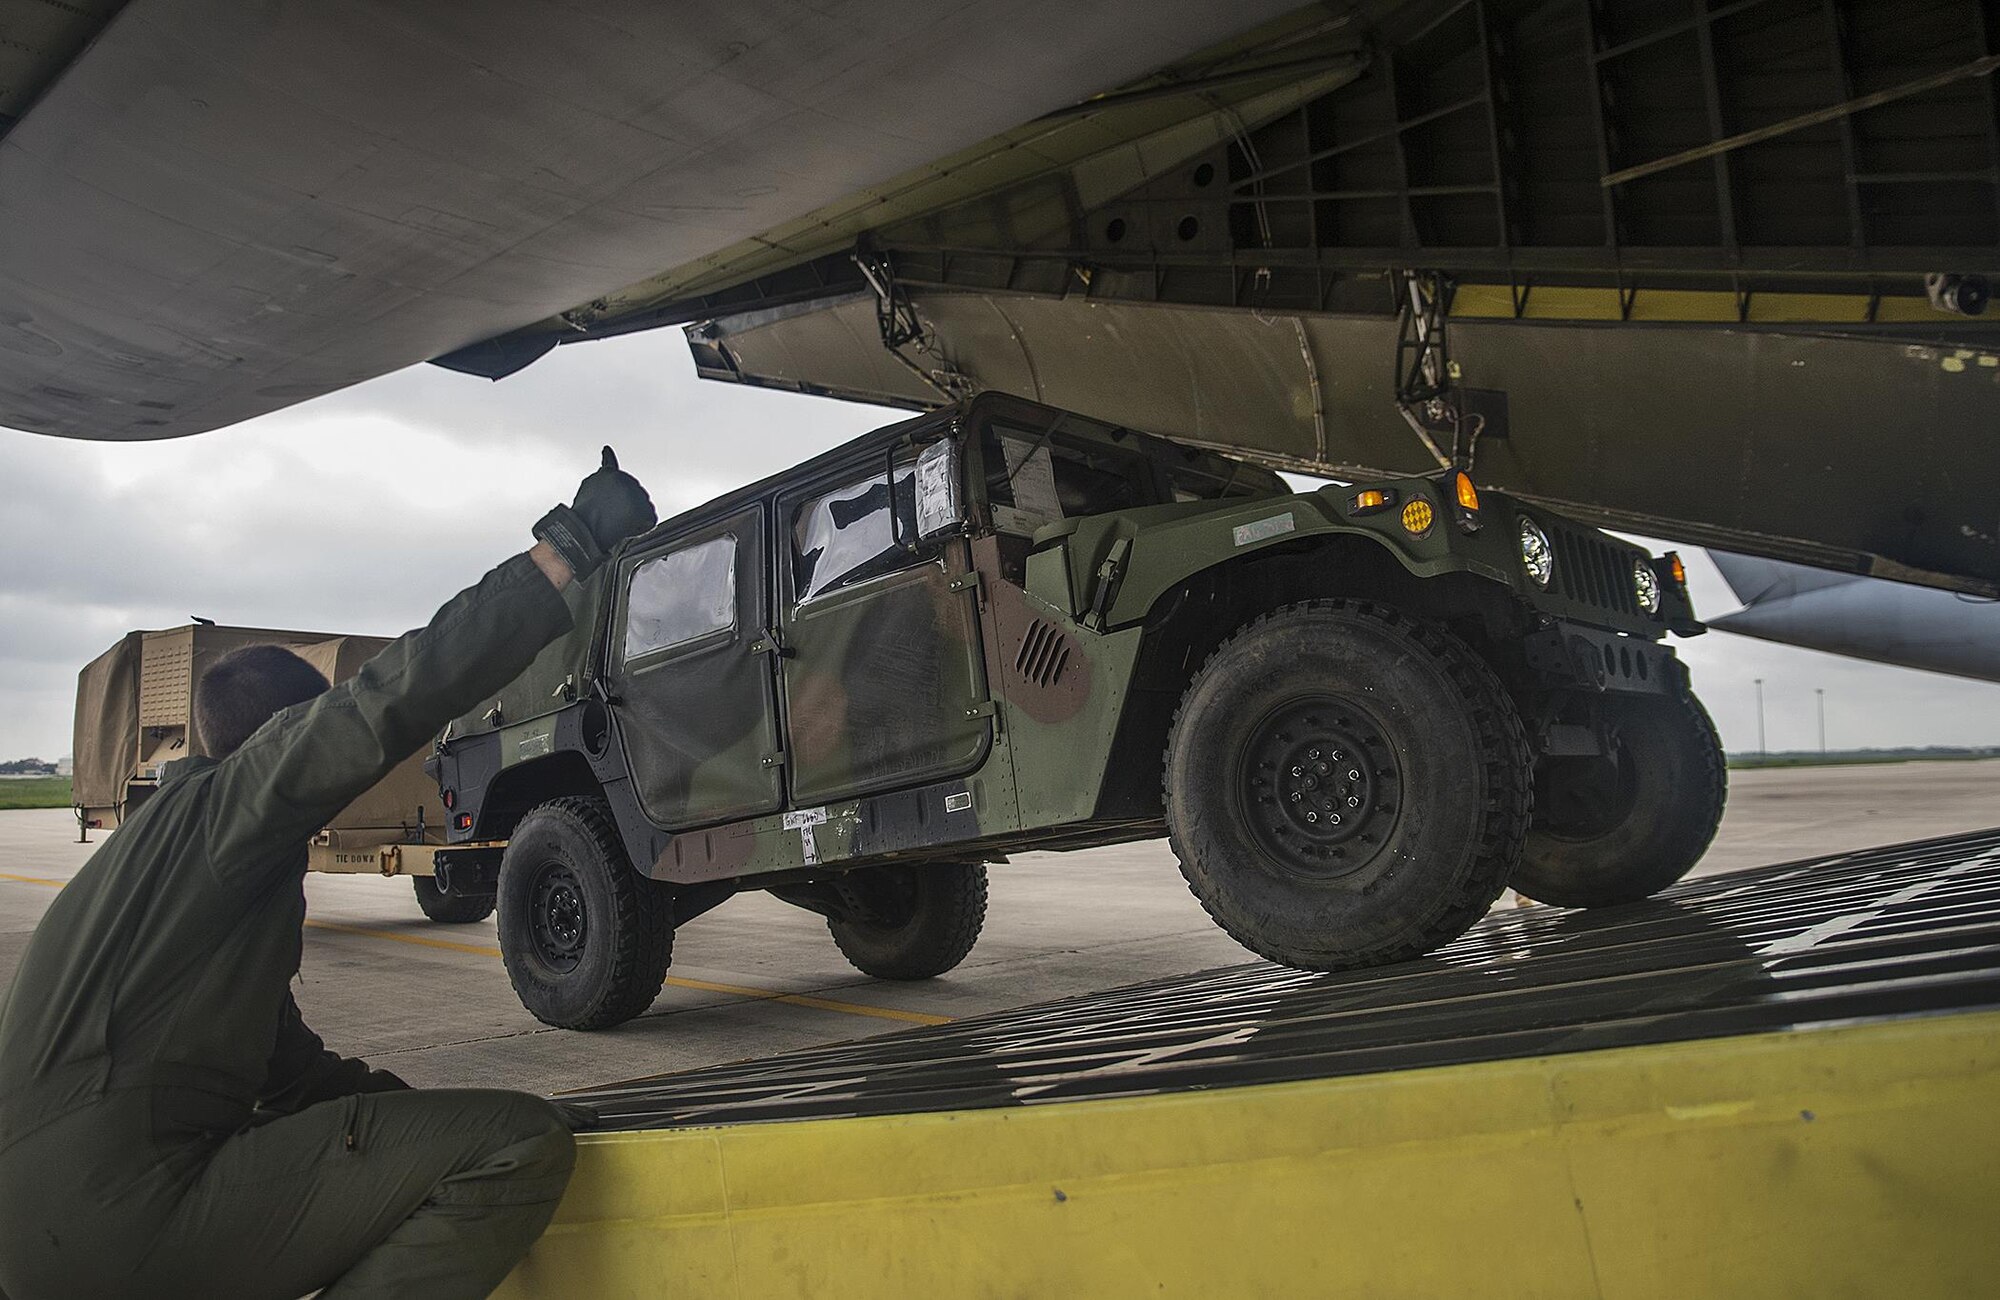 Senior Airman Joshua Green, 68th Airlift Squadron loadmaster, gives a "thumbs up" to load a Humvee onto an awaiting C-5A Galaxy aircraft Sept. 8, 2016 at Joint Base San Antonio-Lackland, Texas. U.S. Army South’s Headquarters and Headquarters Battalion Soldiers from JBSA-Fort Sam-Houston are taking part in a weeklong emergency deployment exercise at Naval Station Guantanamo Bay, Cuba. (U.S. Air Force photo by Benjamin Faske)